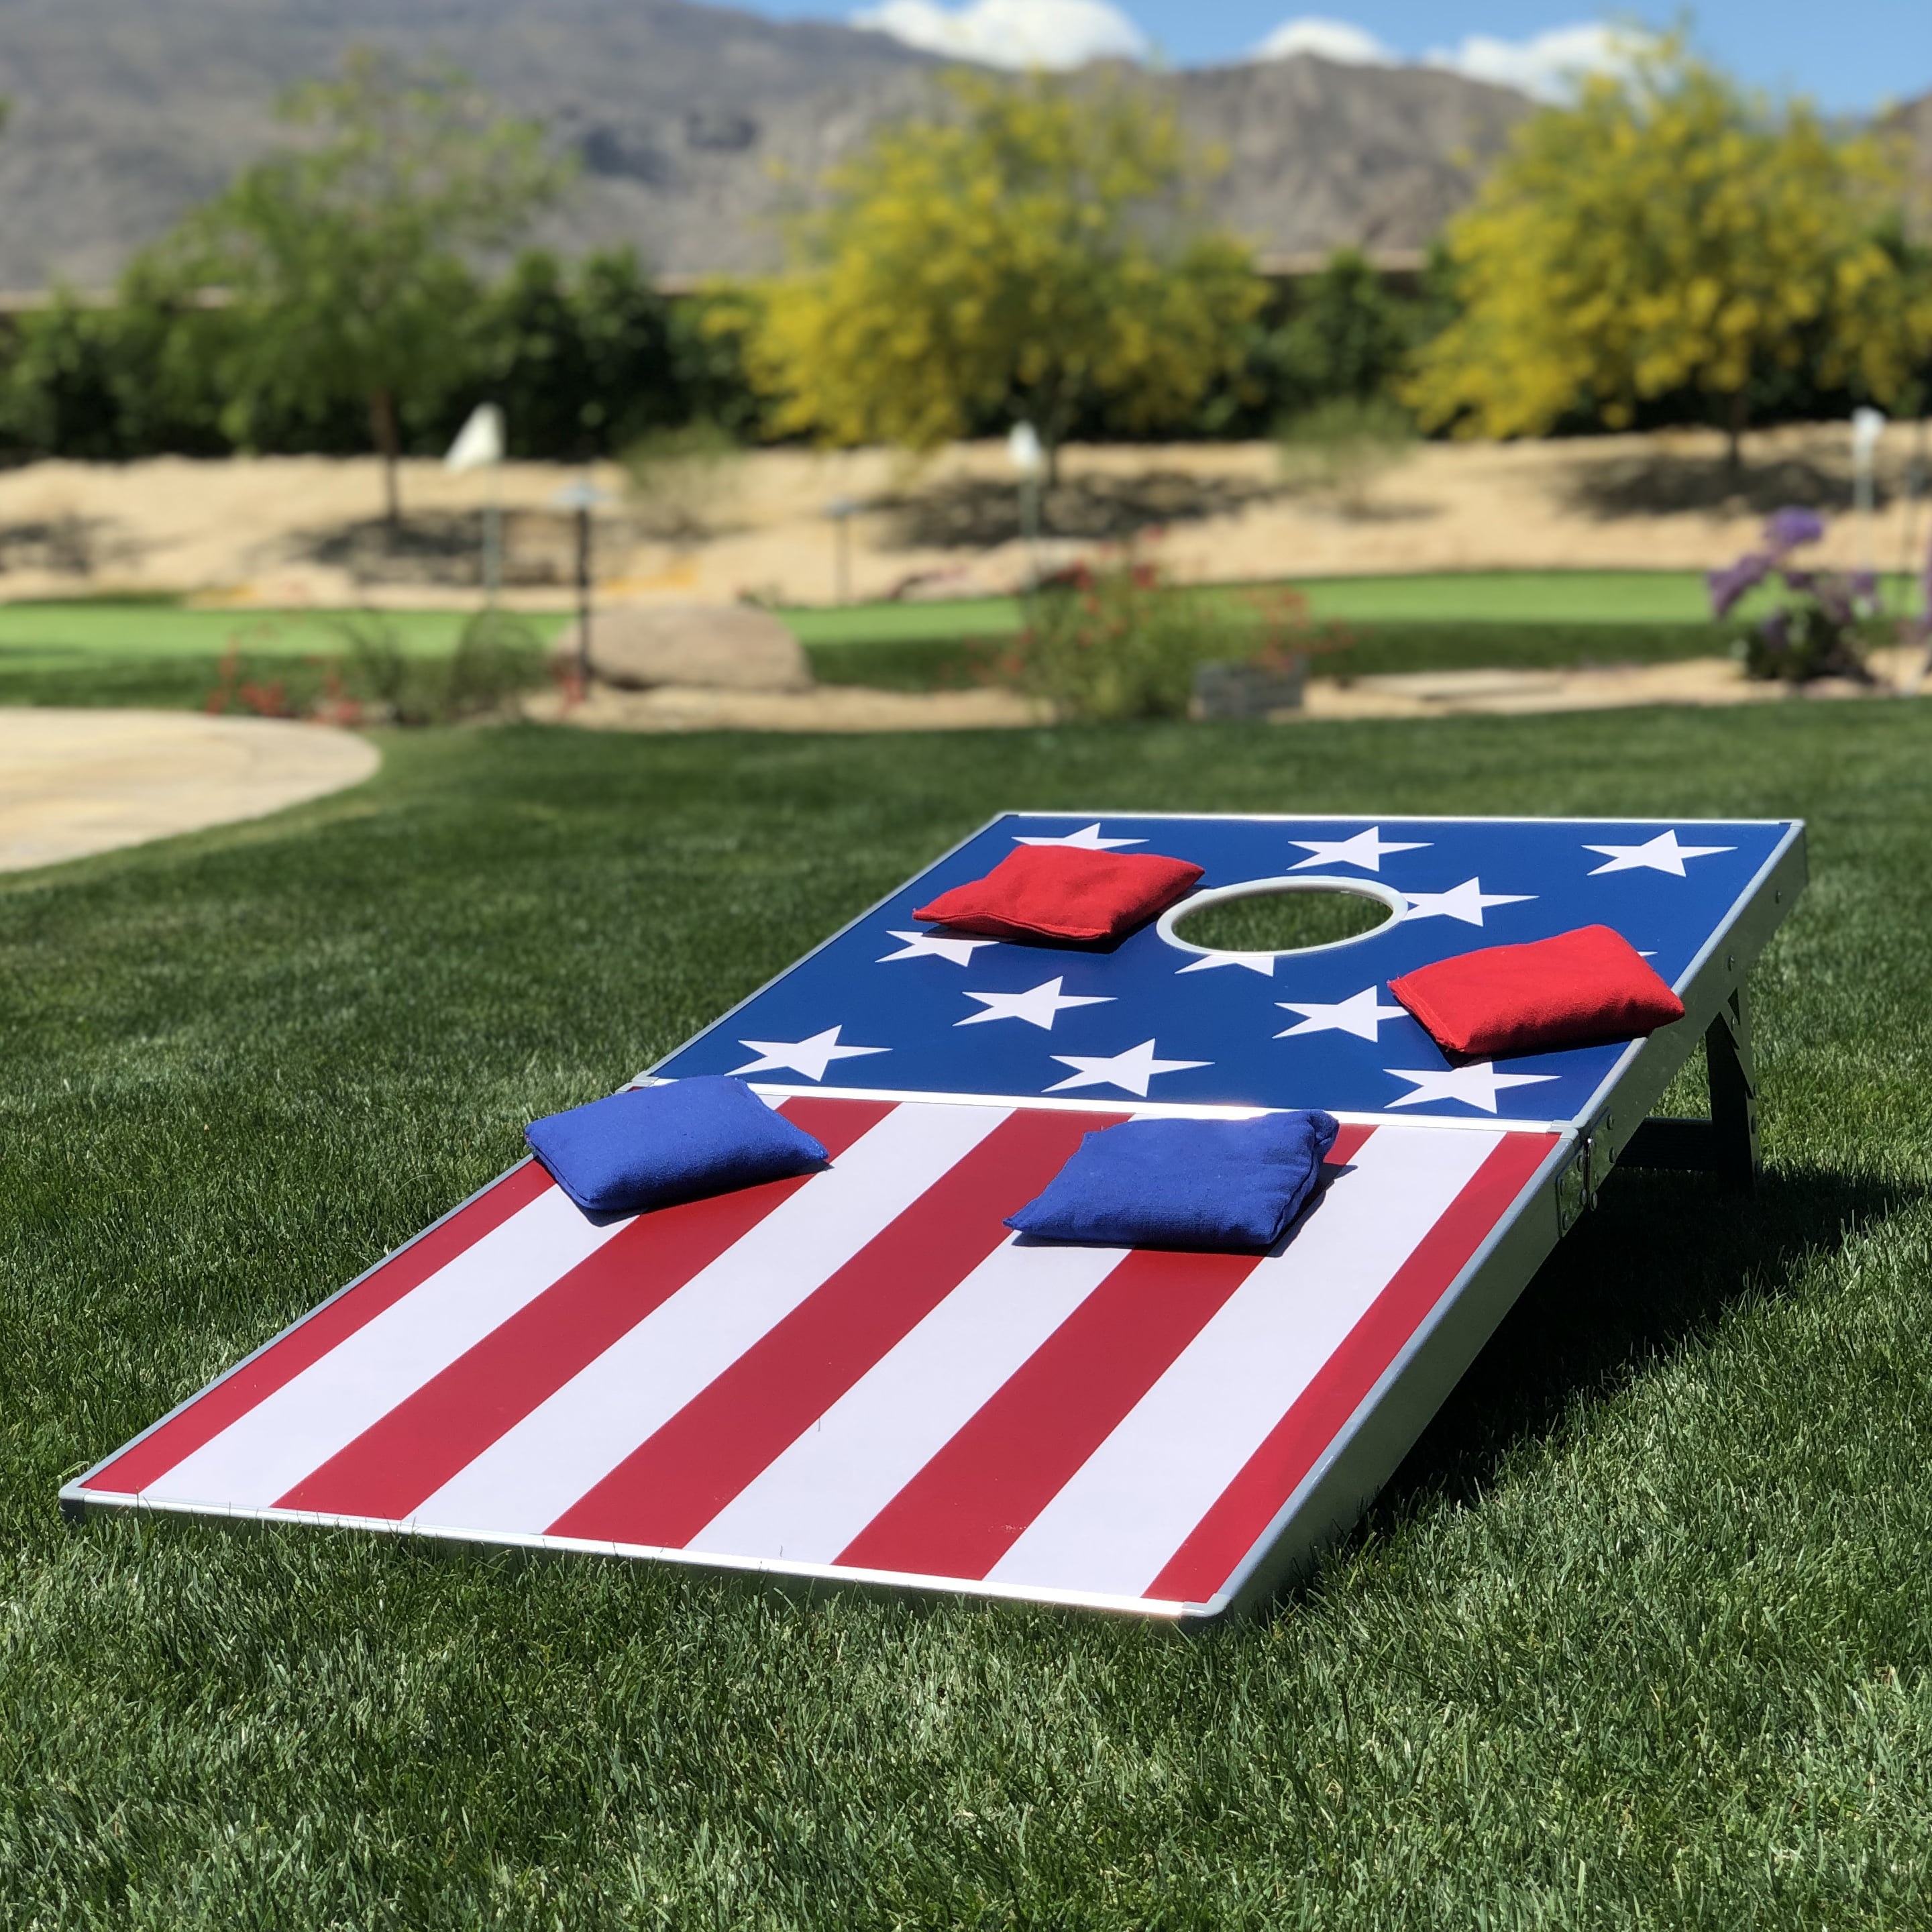 8 Bean Bags American Flag Details about   GoSports Solid Wood Cornhole Set Two 4’ x 2’ Boards 